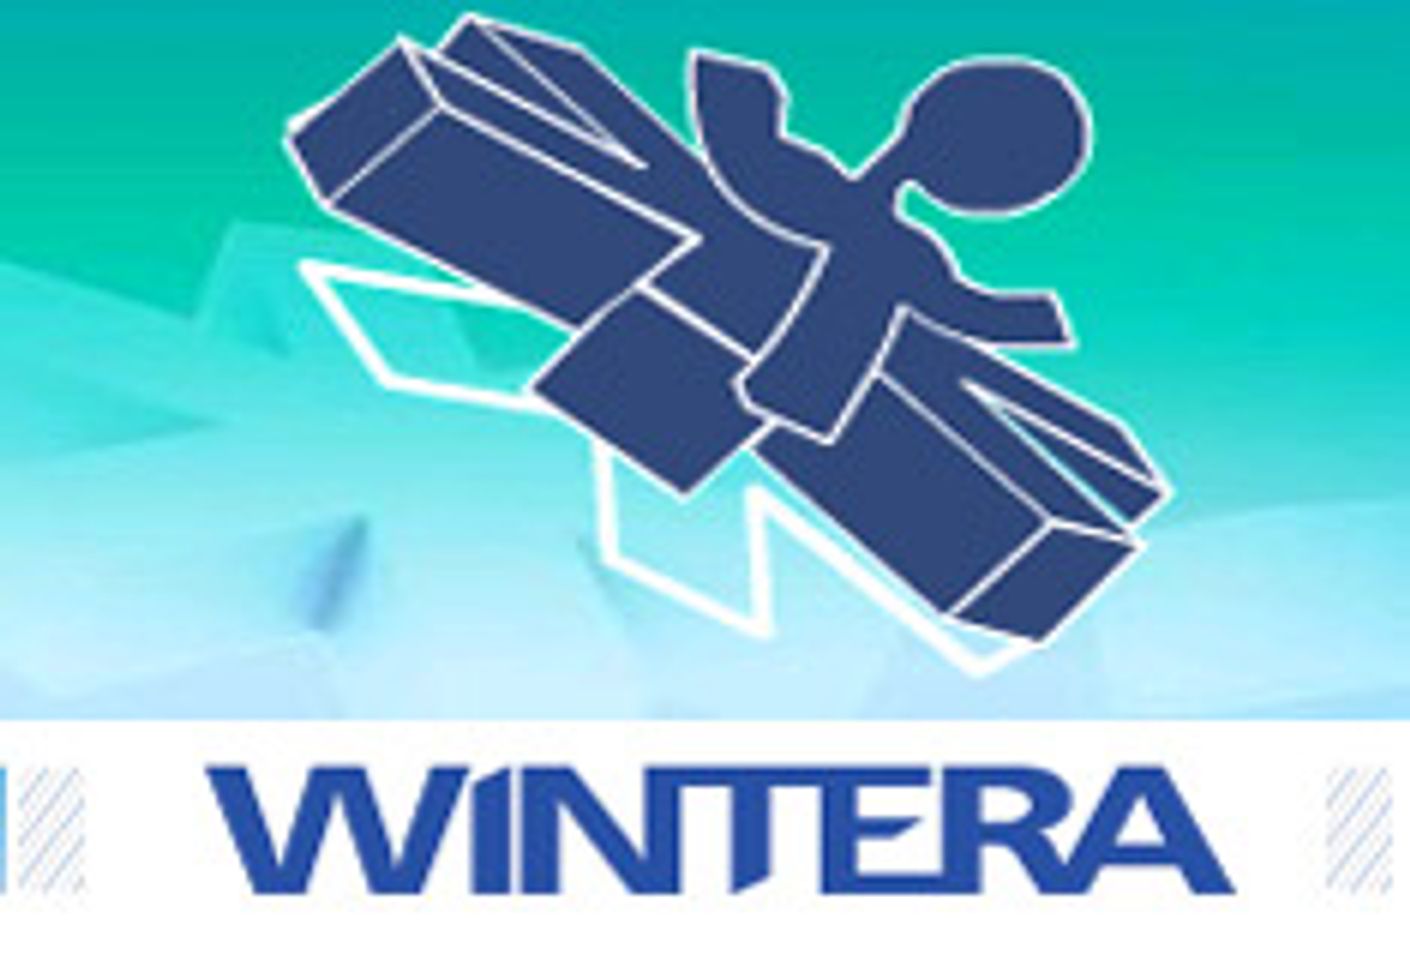 Wintera Launches Flat-Rate, In-Room Wi-Fi Service